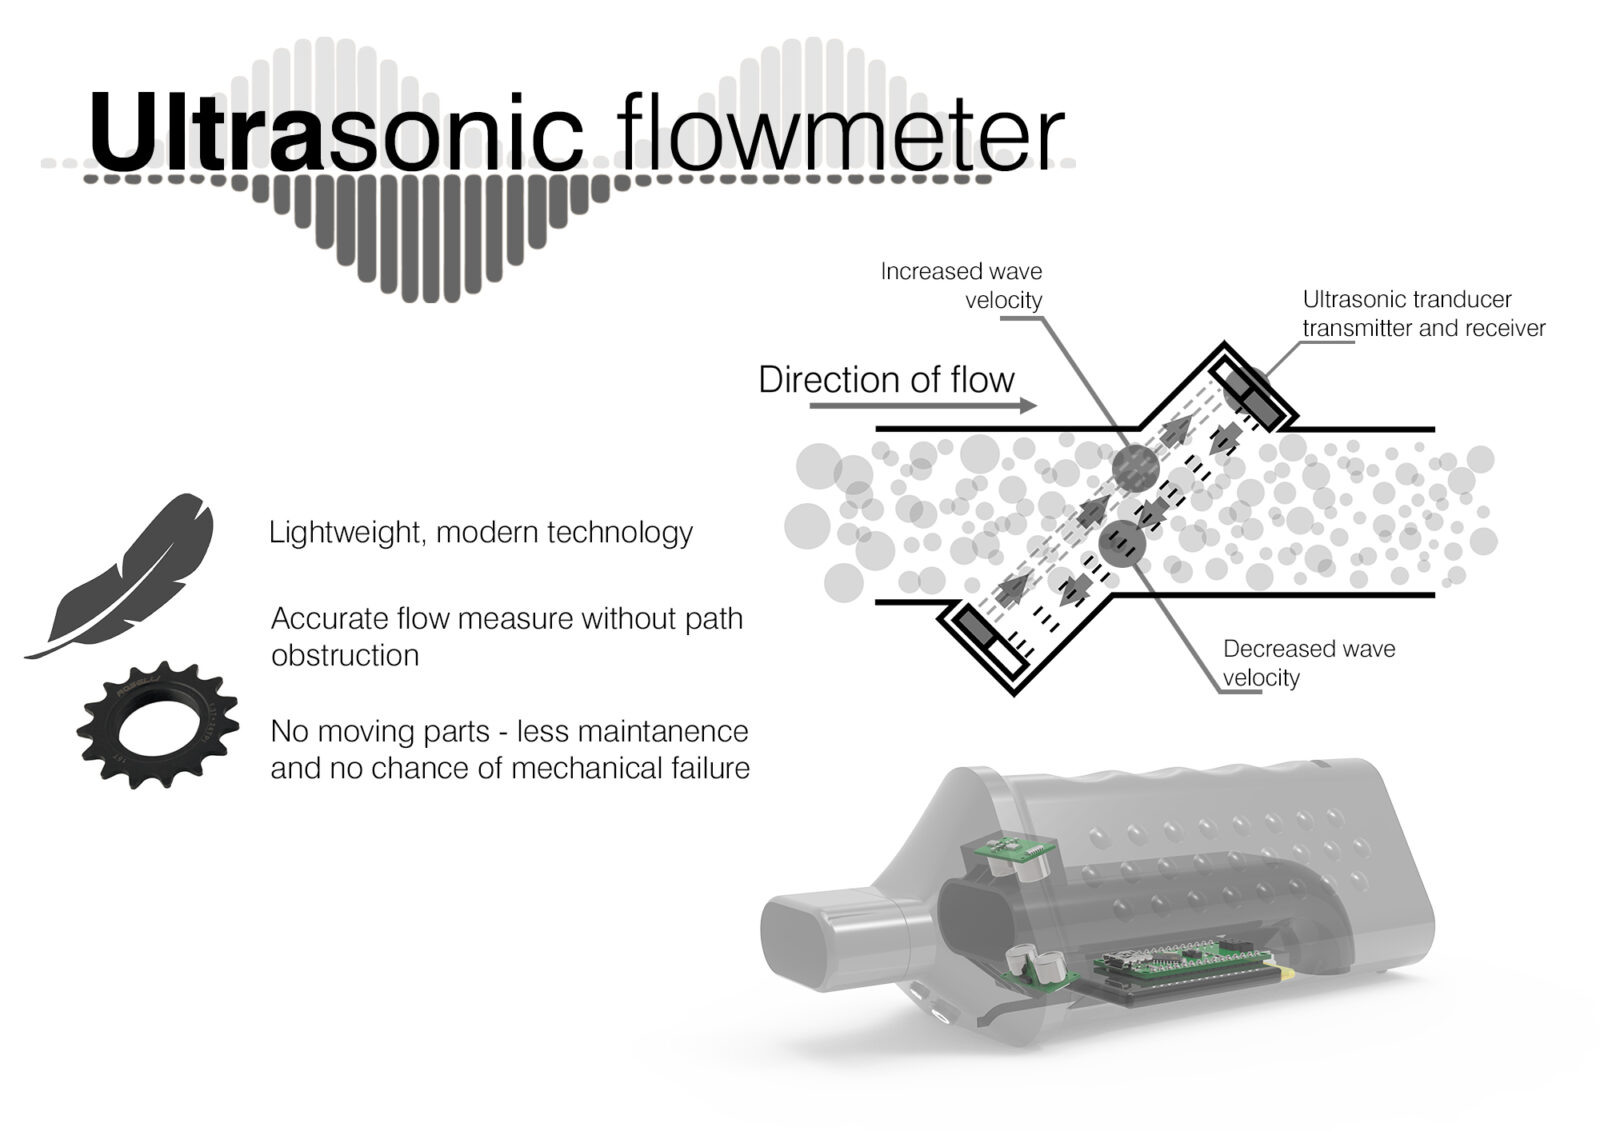 A page explaining the technical details of ultrasonic flowmeter technology.